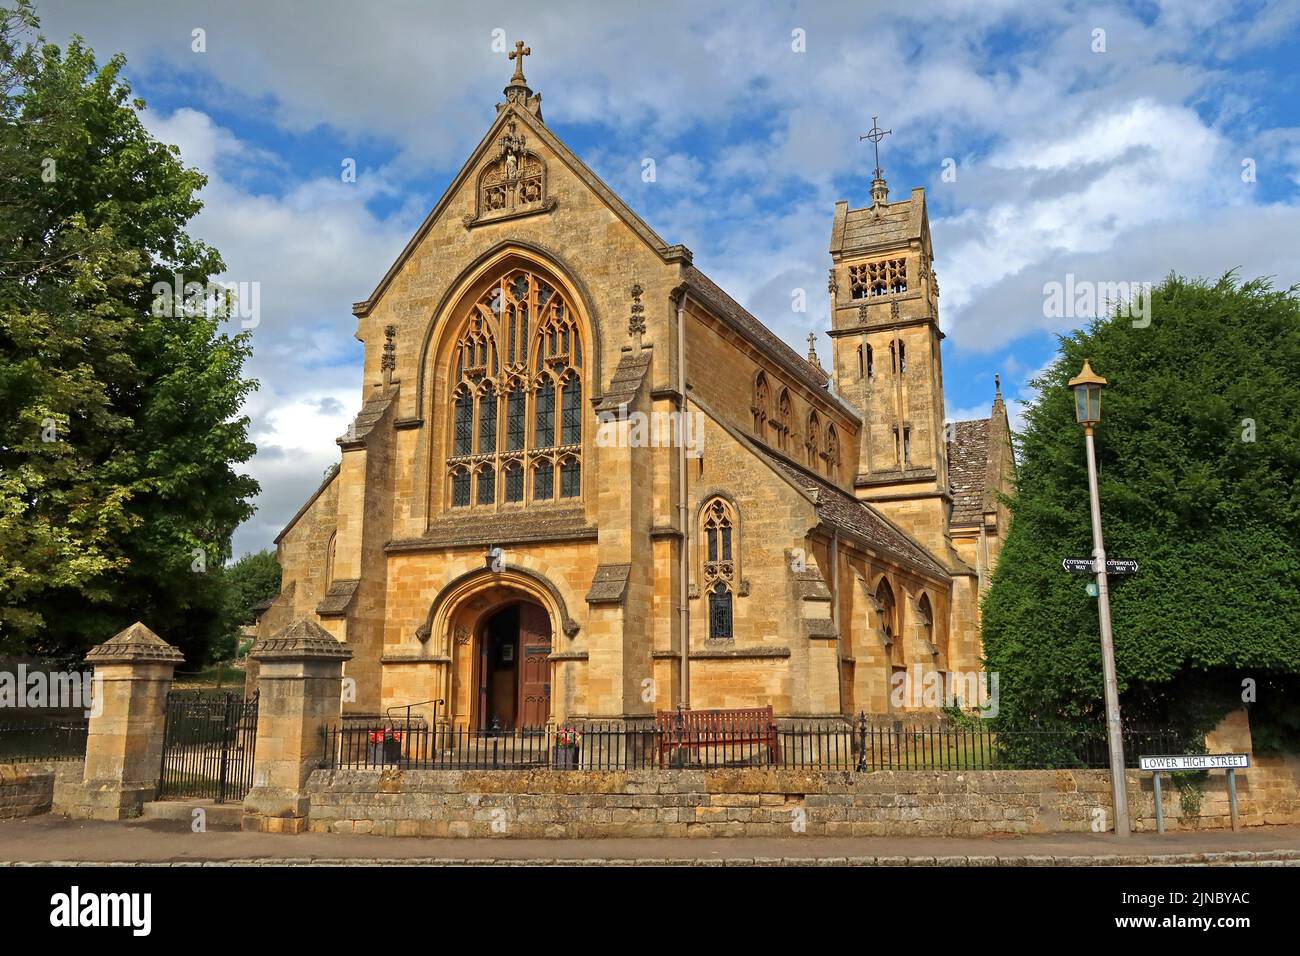 Chiesa di St Catharine - Lower High St, Chipping Campden, Cotswolds, Gloucestershire, Inghilterra, REGNO UNITO, GL55 6AT Foto Stock